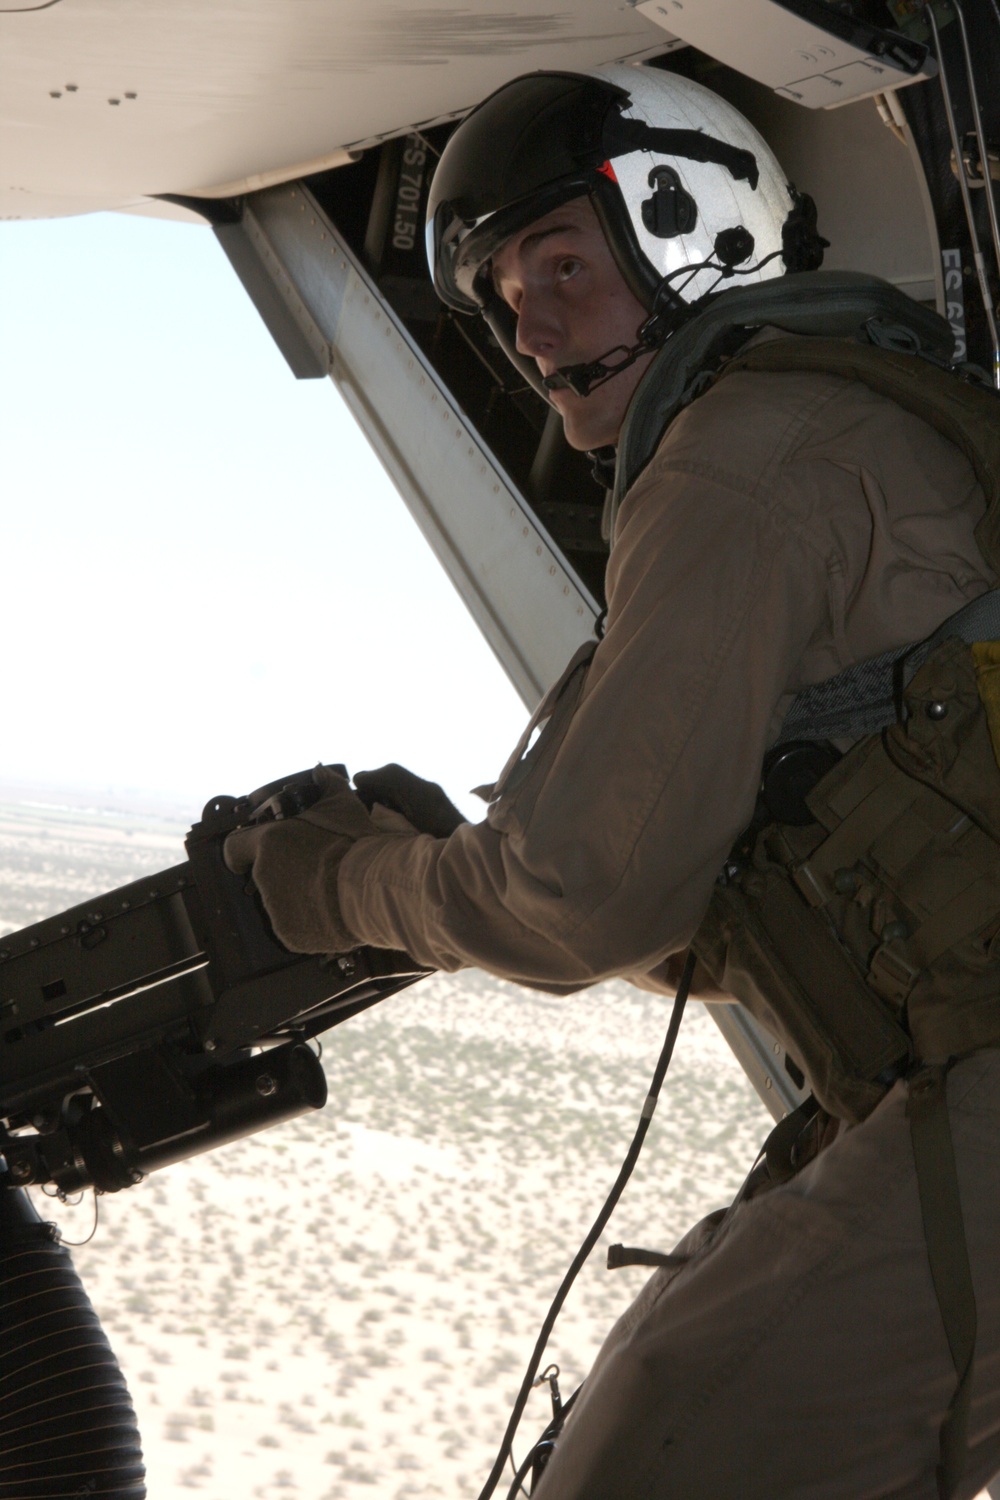 Lock, load with VMM-163